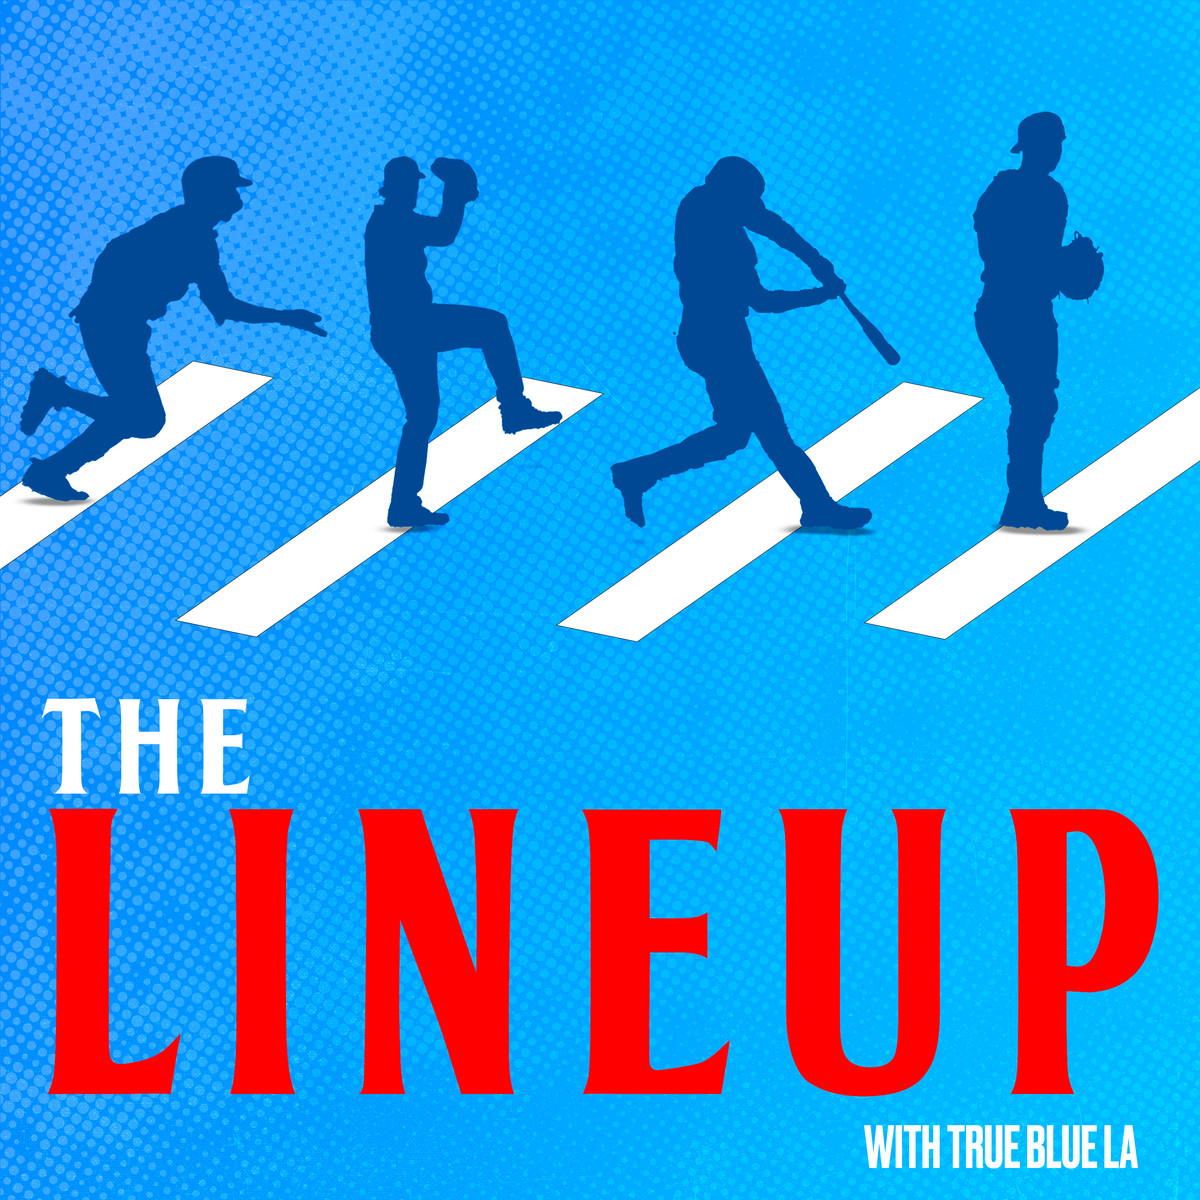 The Lineup, a weekly True Blue LA podcast hosted by Eric Stephen and Jacob Burch, with input from Craig Minami, covering all things Dodgers.